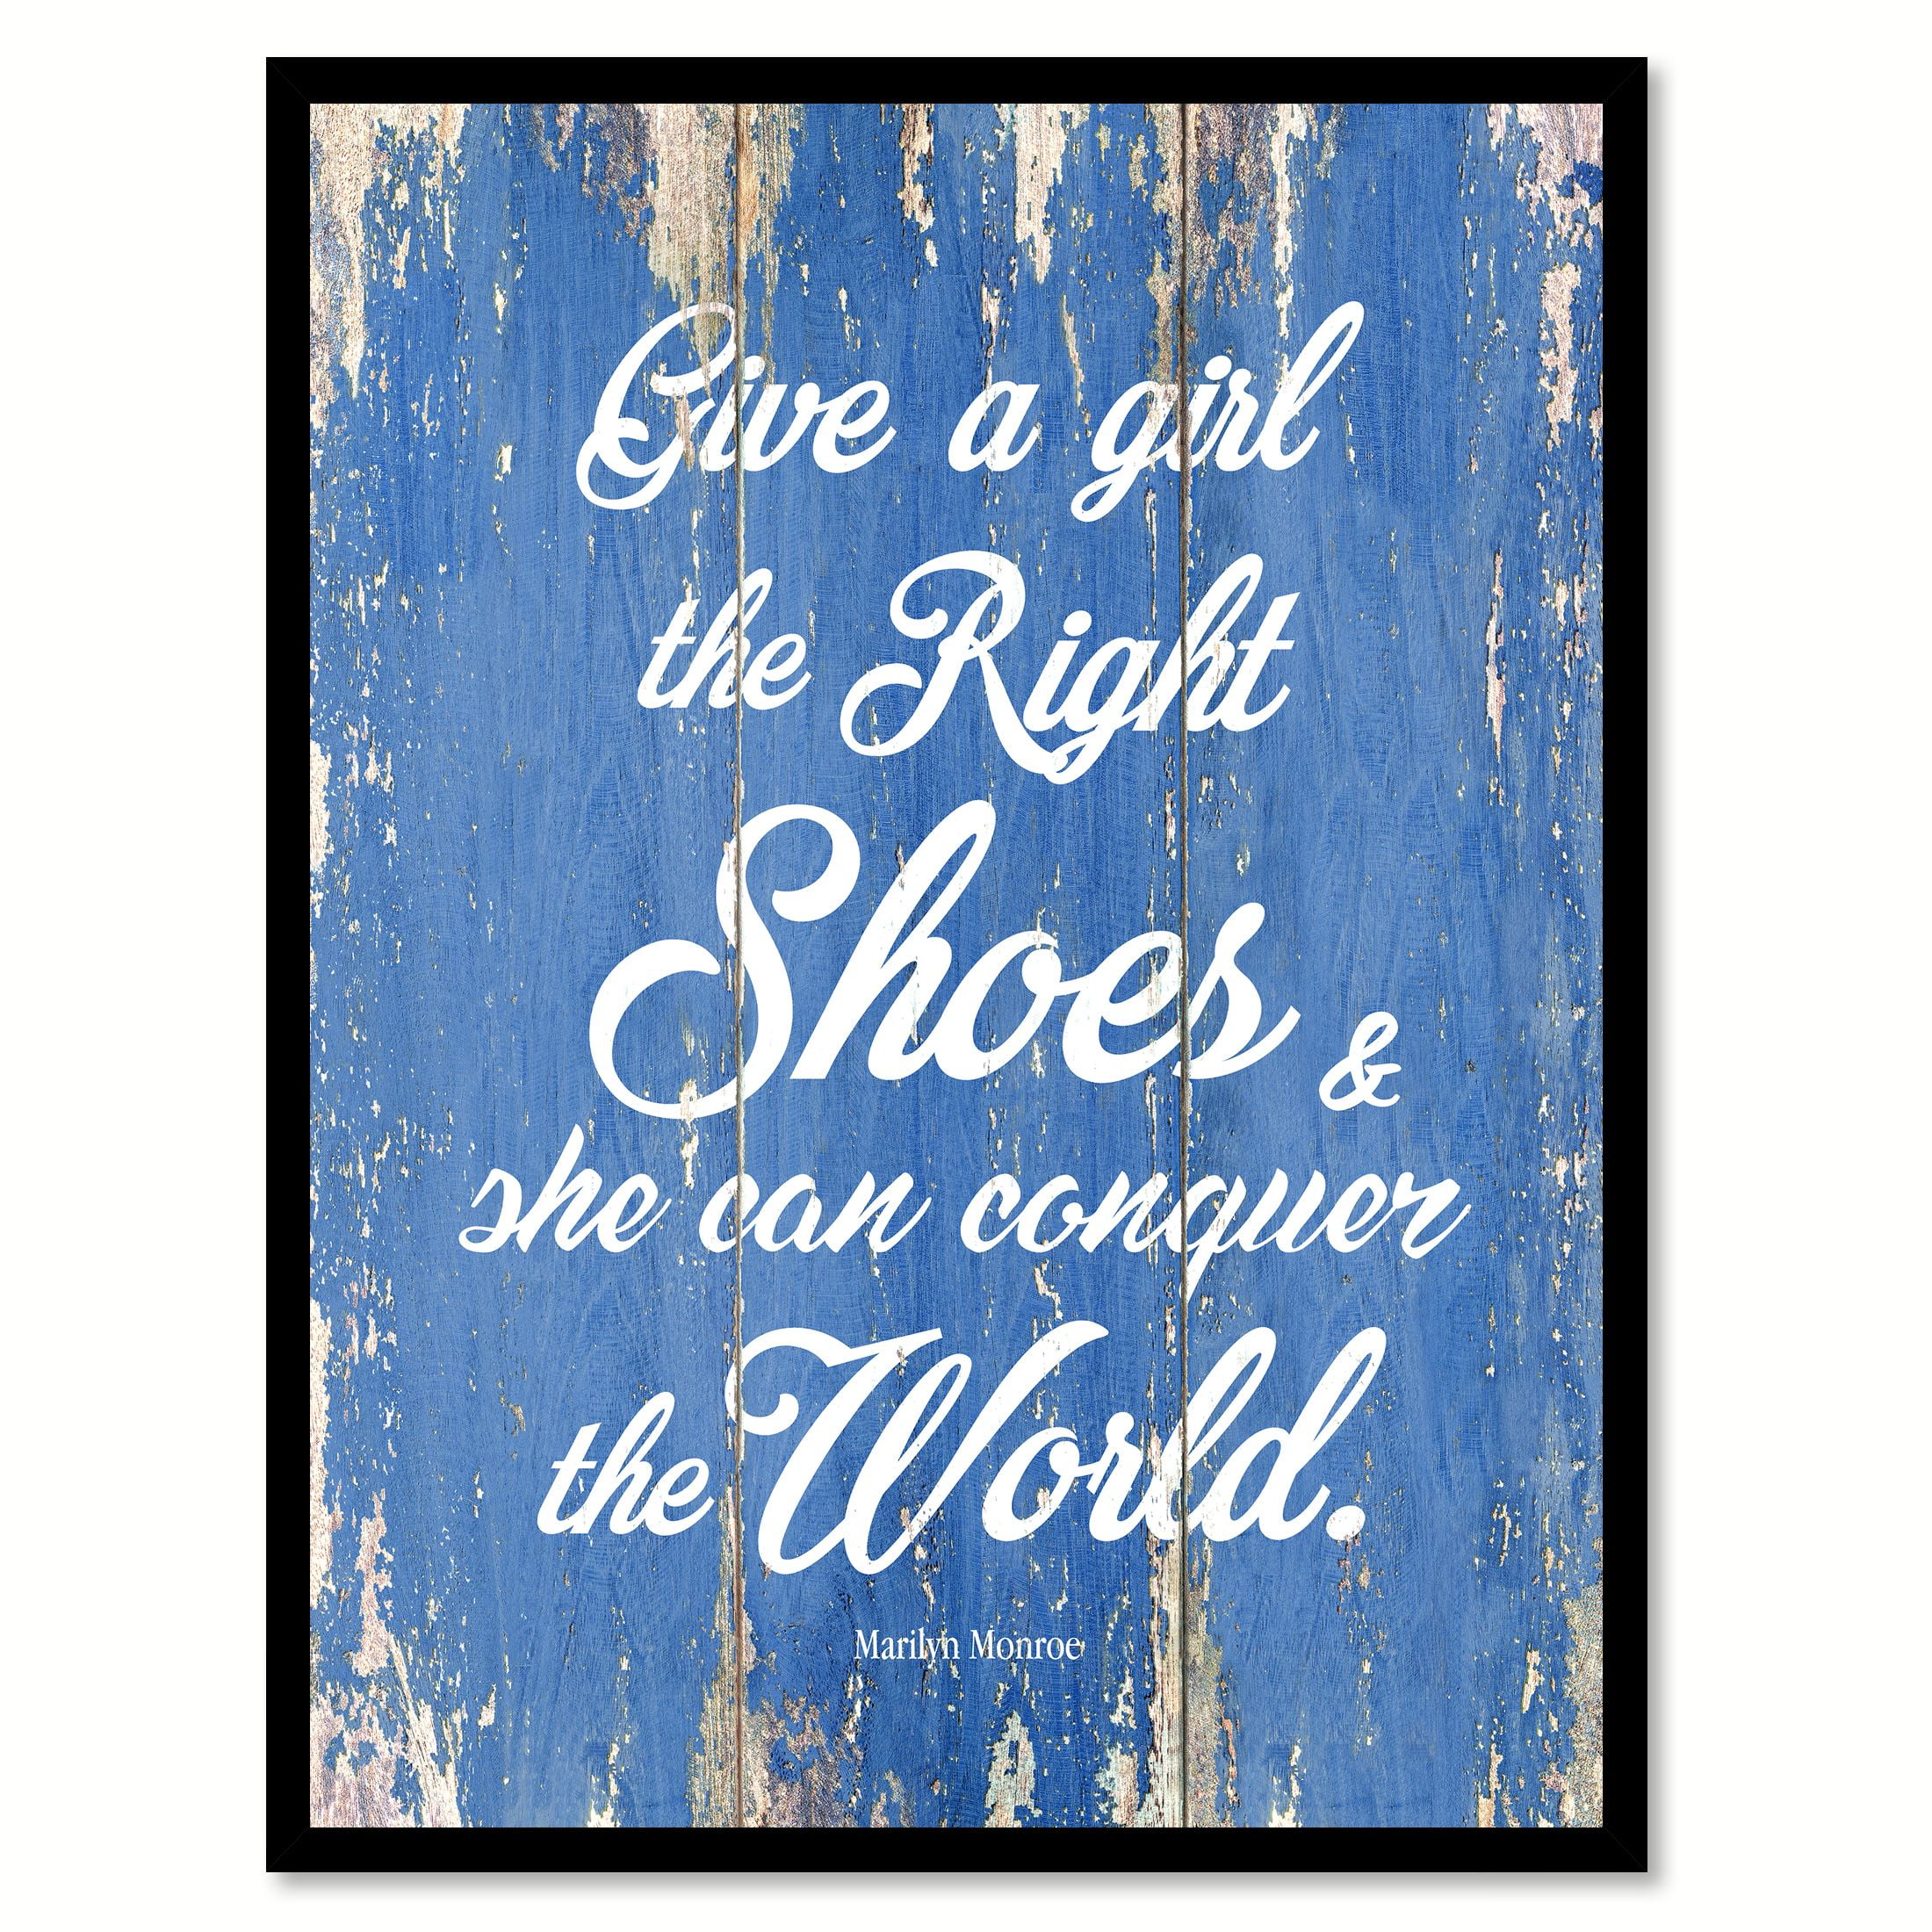 Give A Girl The Right Shoes & She Can Conquer The World Marilyn Monroe Happy Love Quote Saying ...